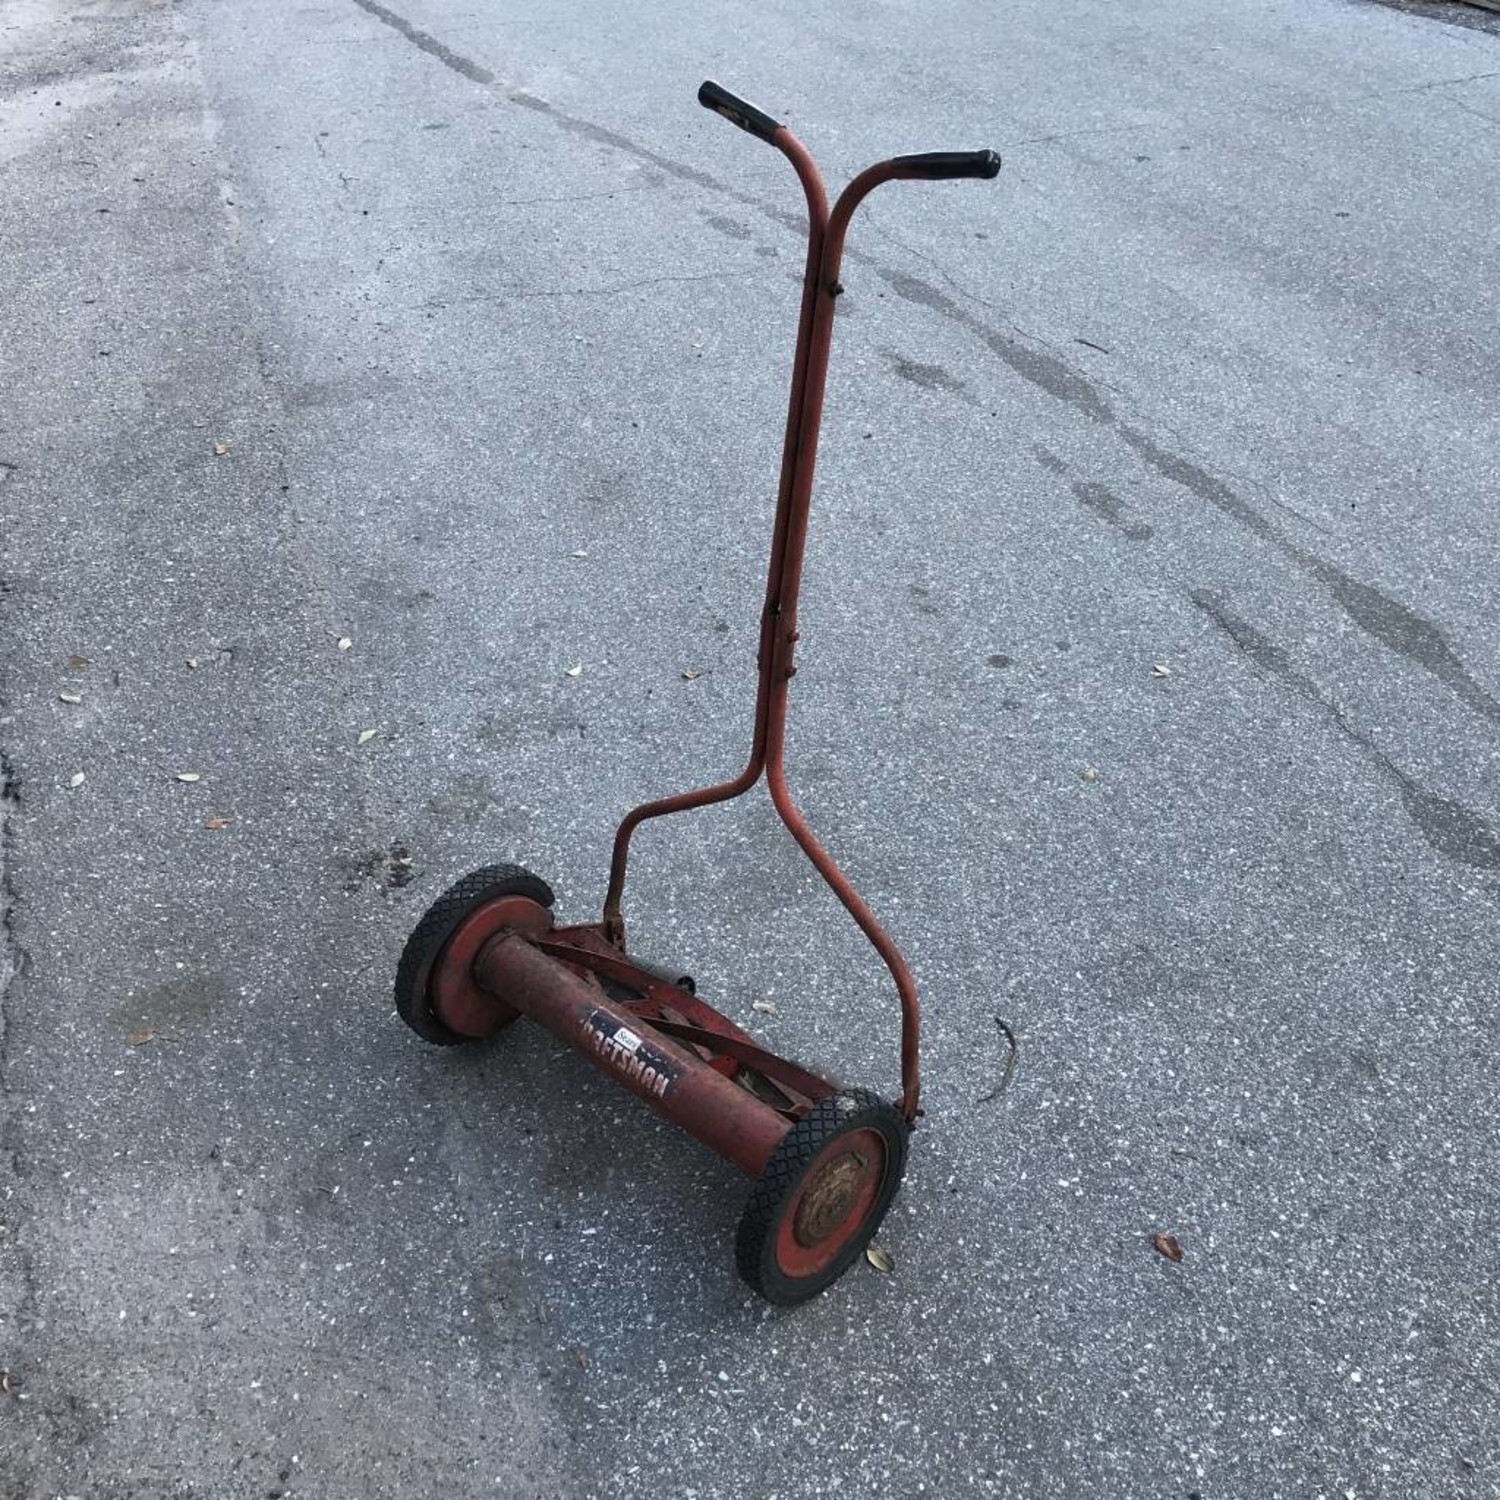 Antique Reel Push Mower Antiques Collectibles Bluffton,, 51% OFF